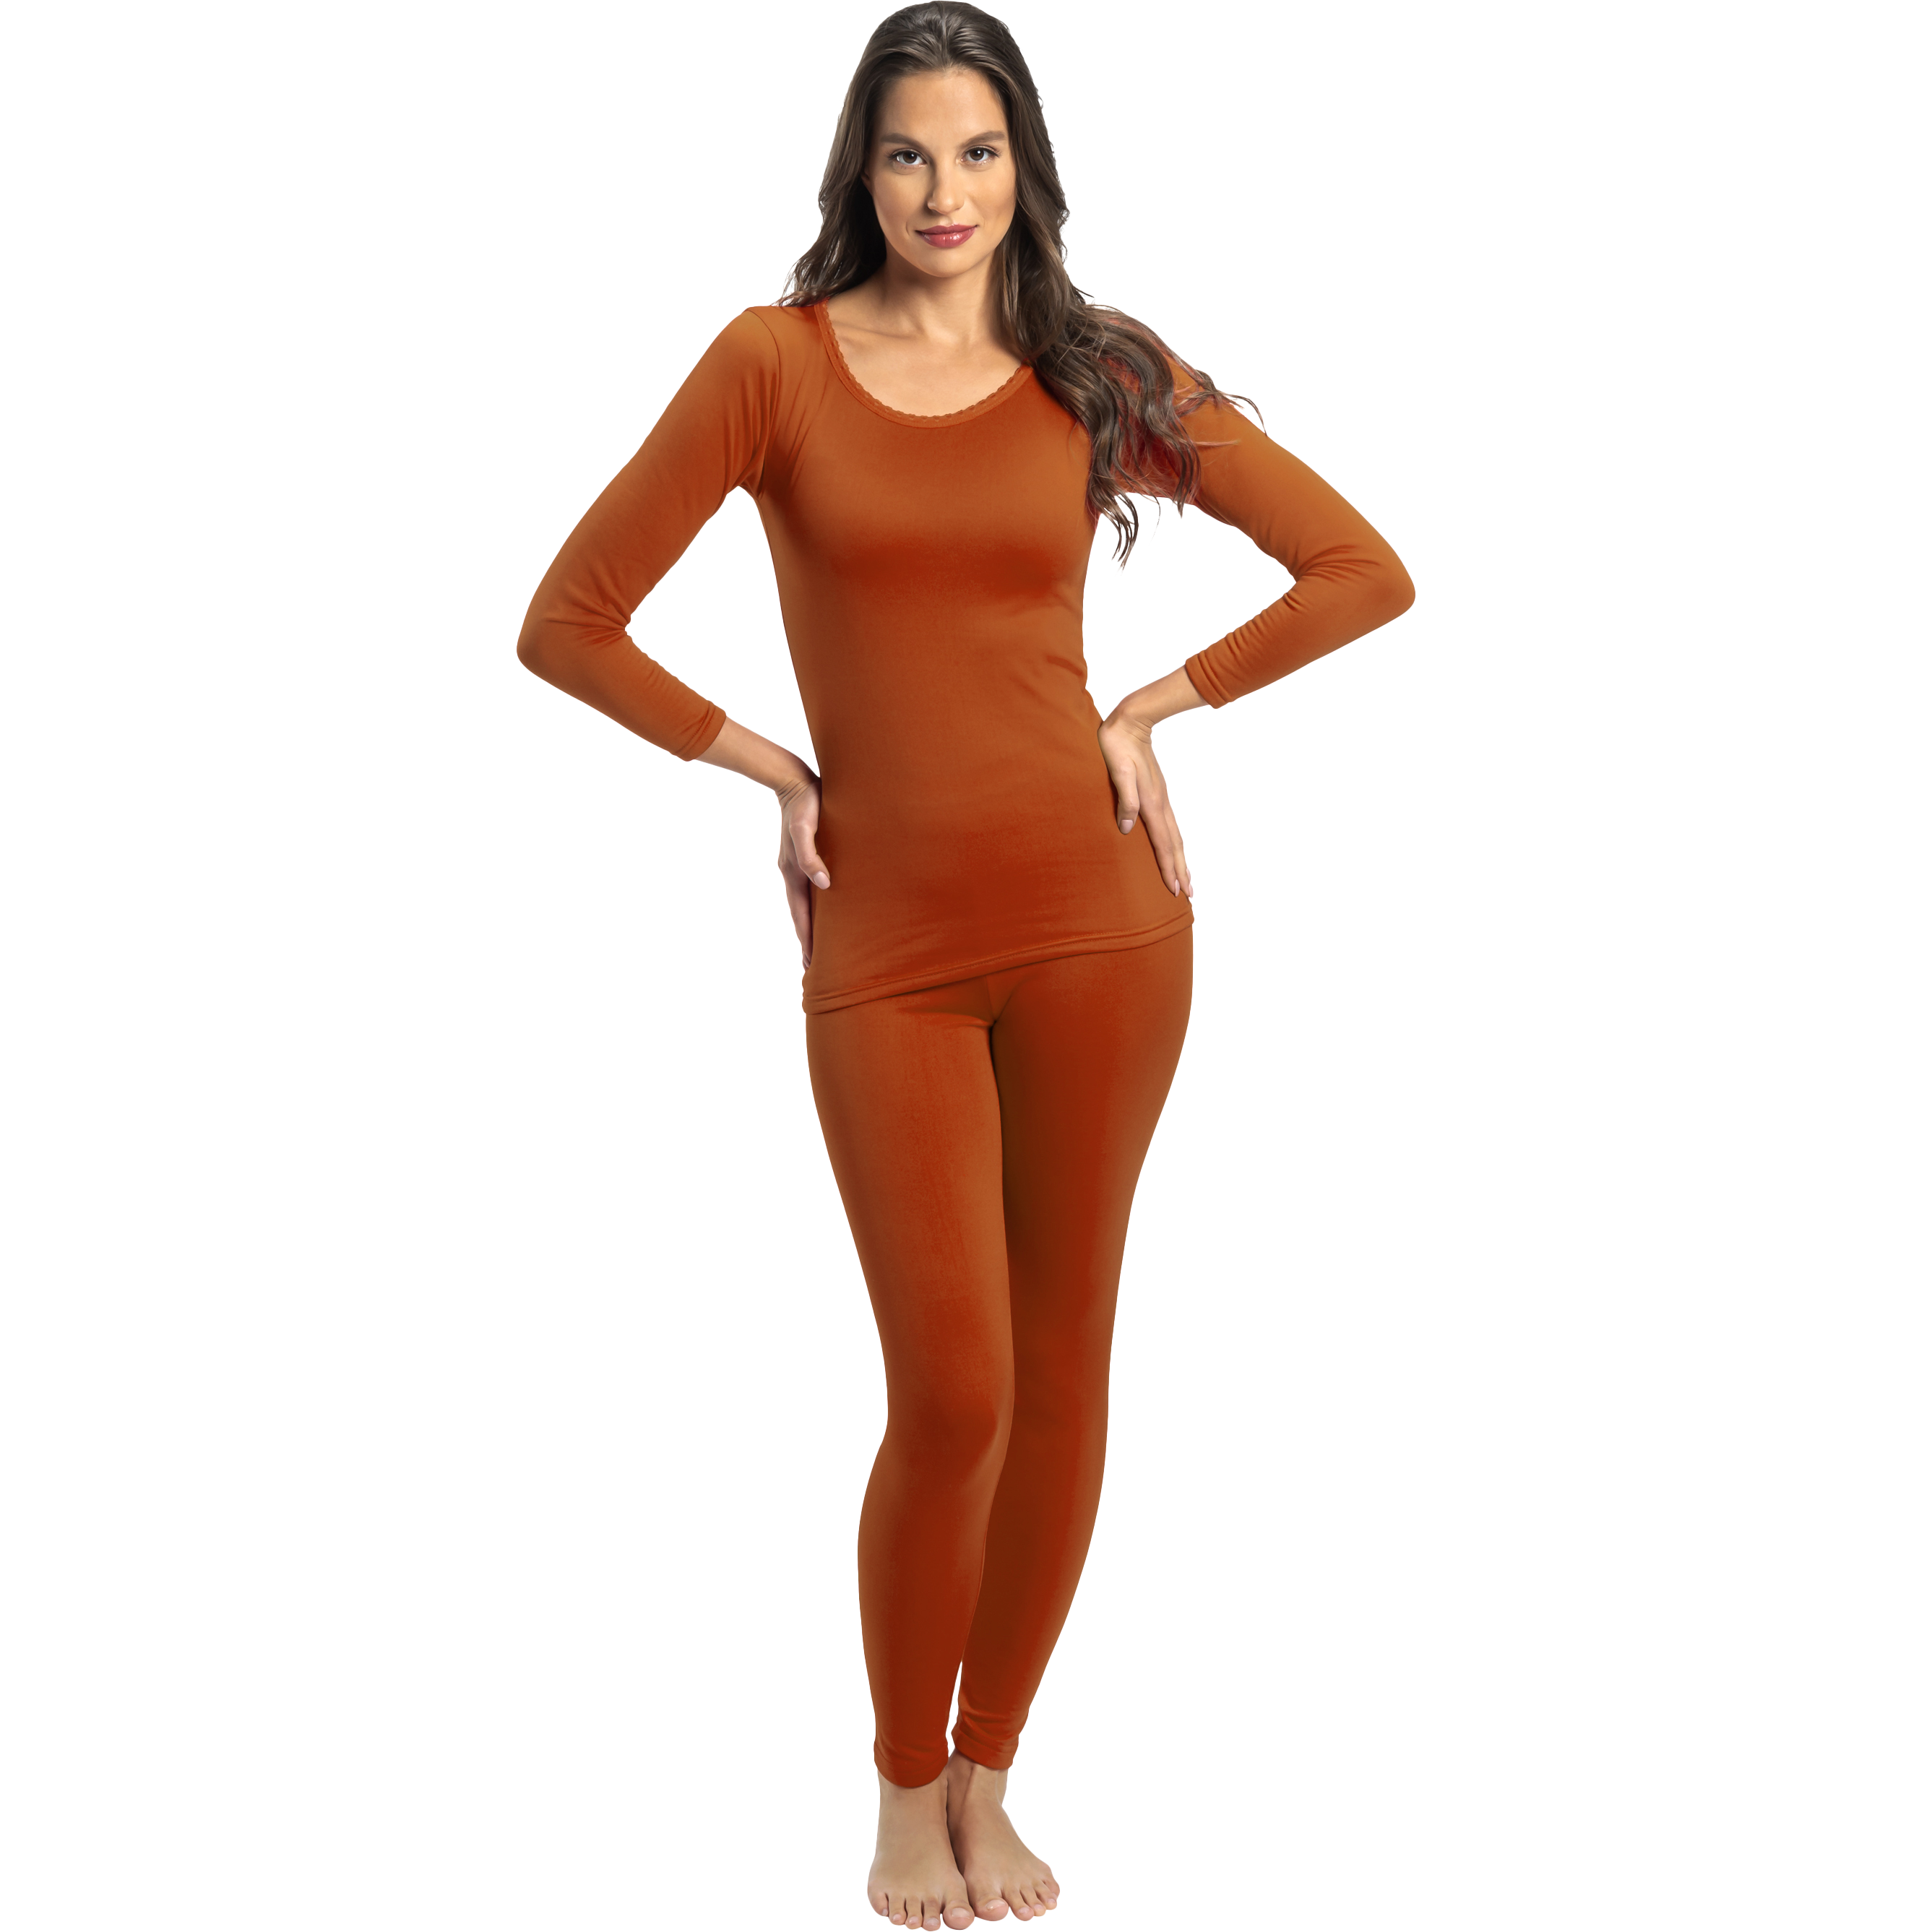  Rocky Thermal Underwear For Women Lightweight Cotton Knit  Thermals Womens Base Layer Long John Set